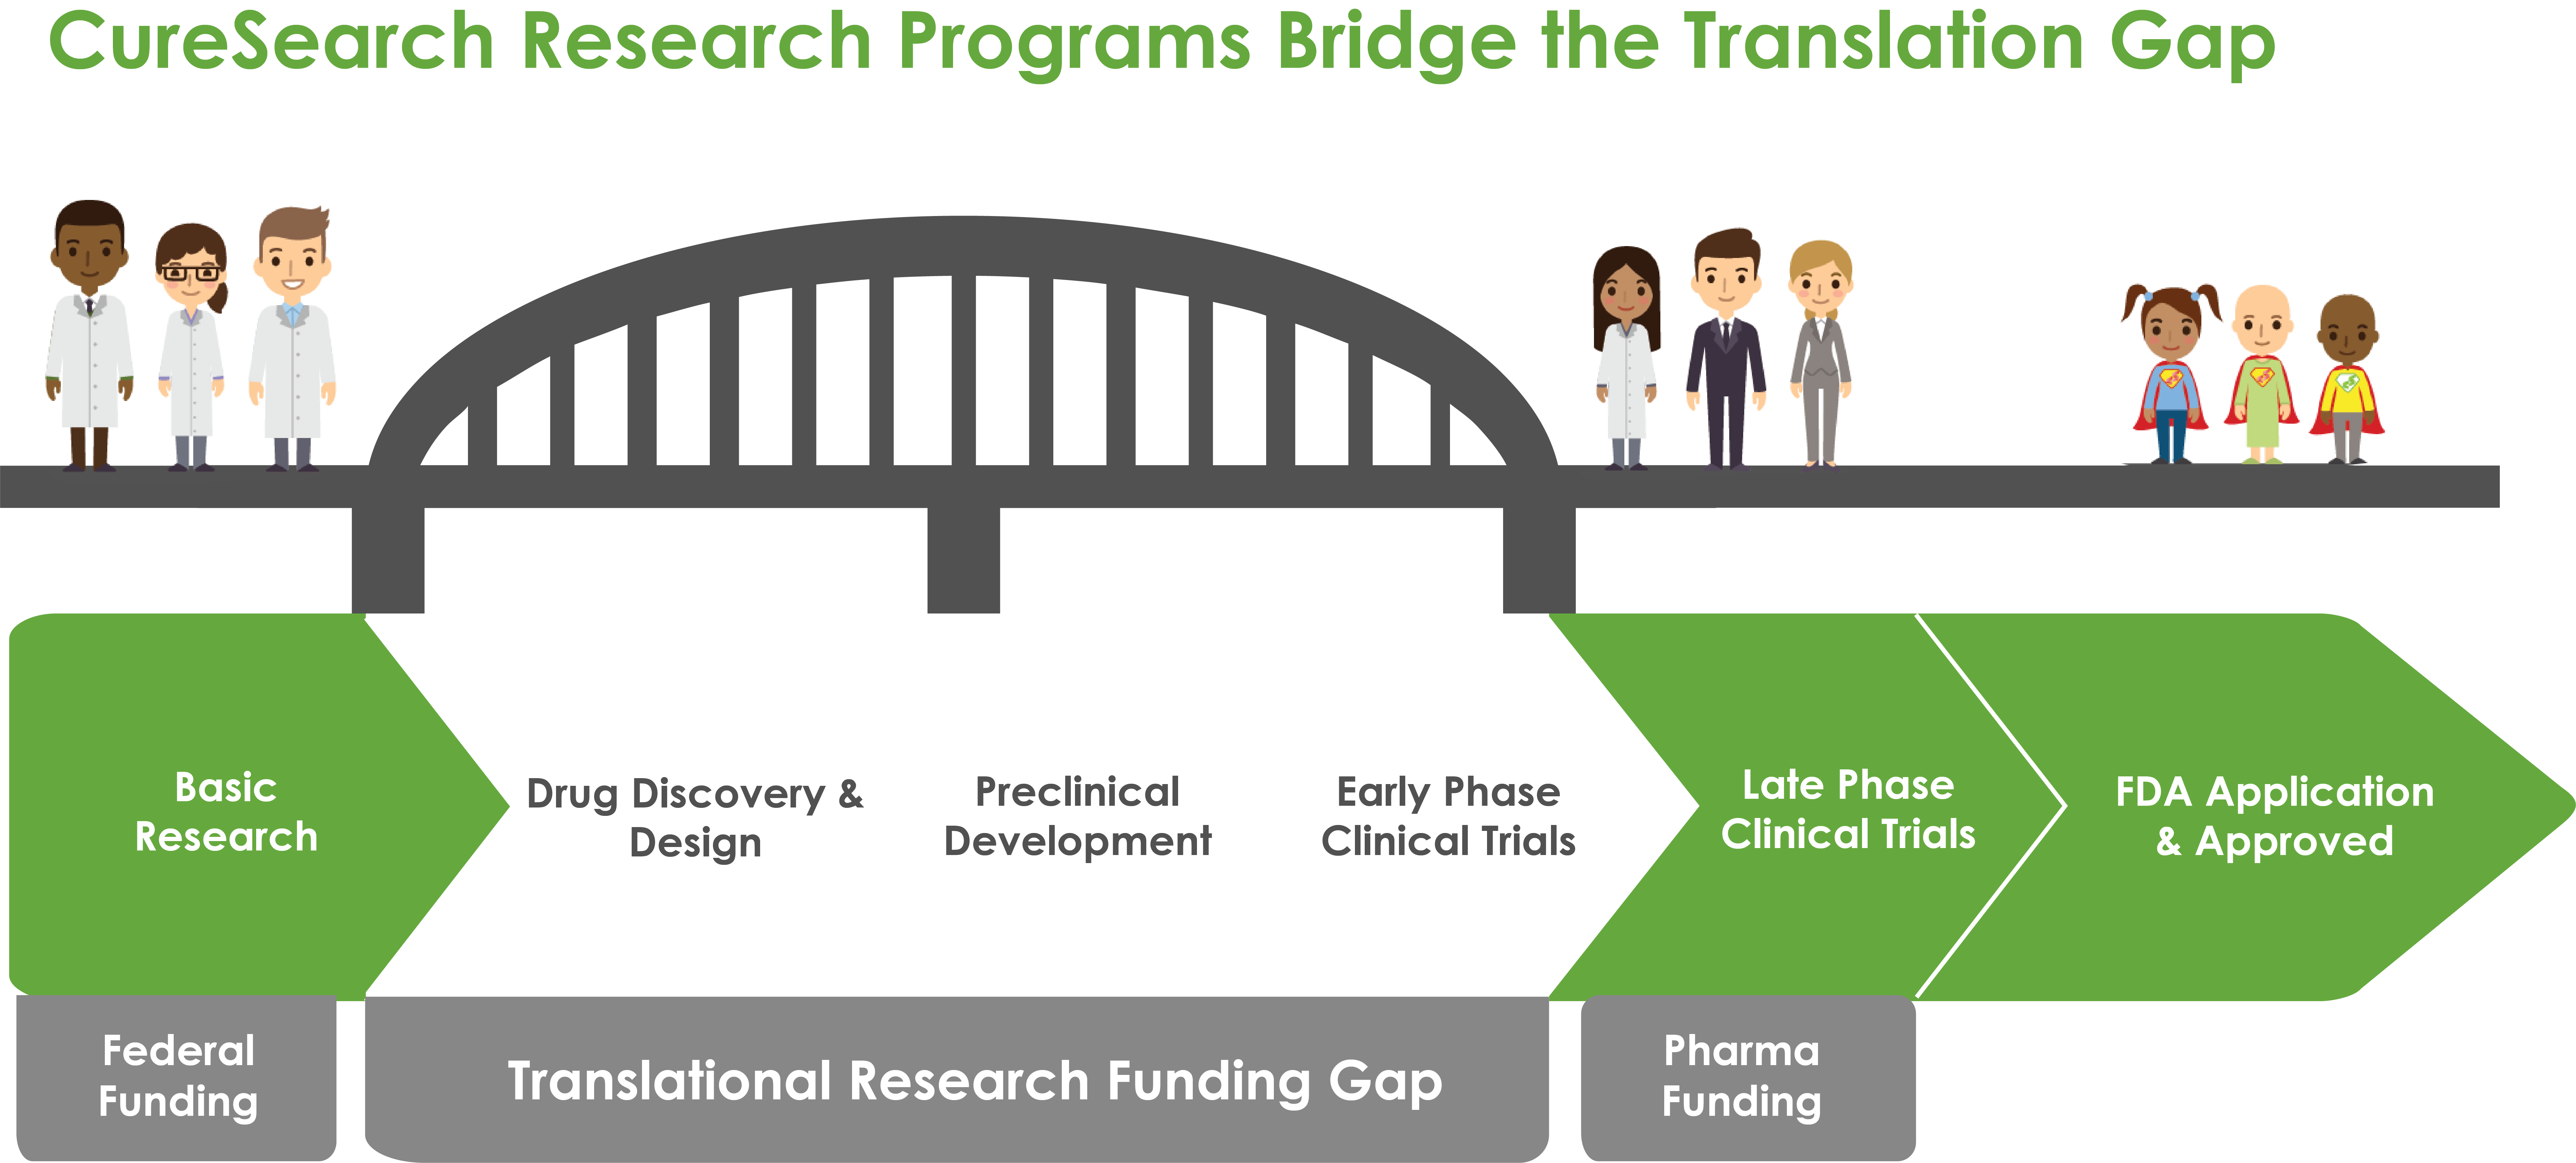 the translational research gap